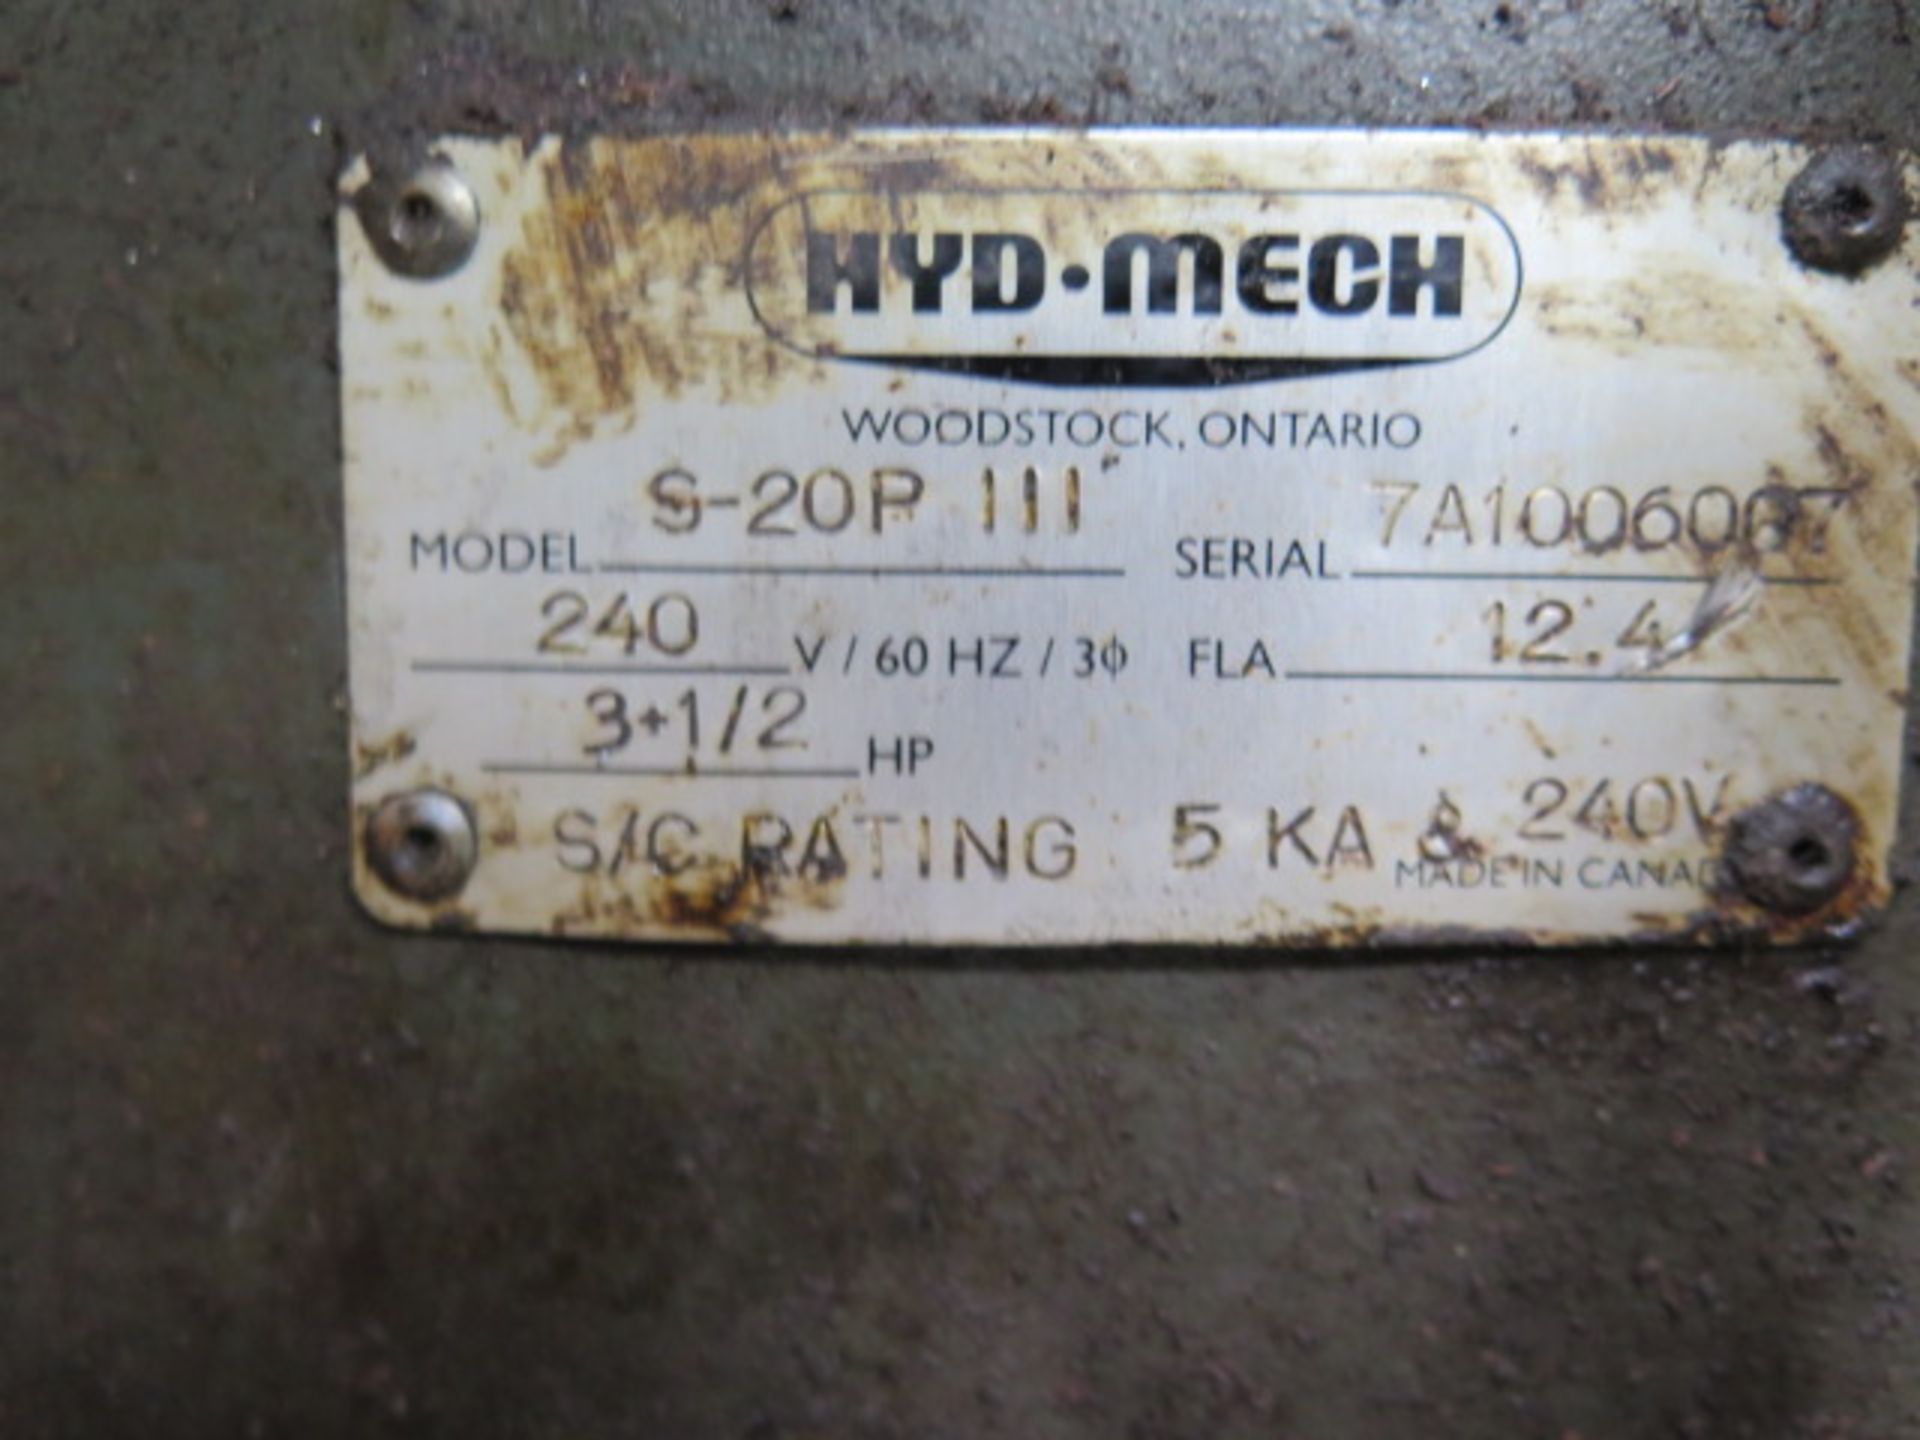 Hyd-Mech S-20P Series III 13” Horizontal Band Saw w/ Hyd-Mech Controls, Hyd Clamping, SOLD AS IS - Image 11 of 11